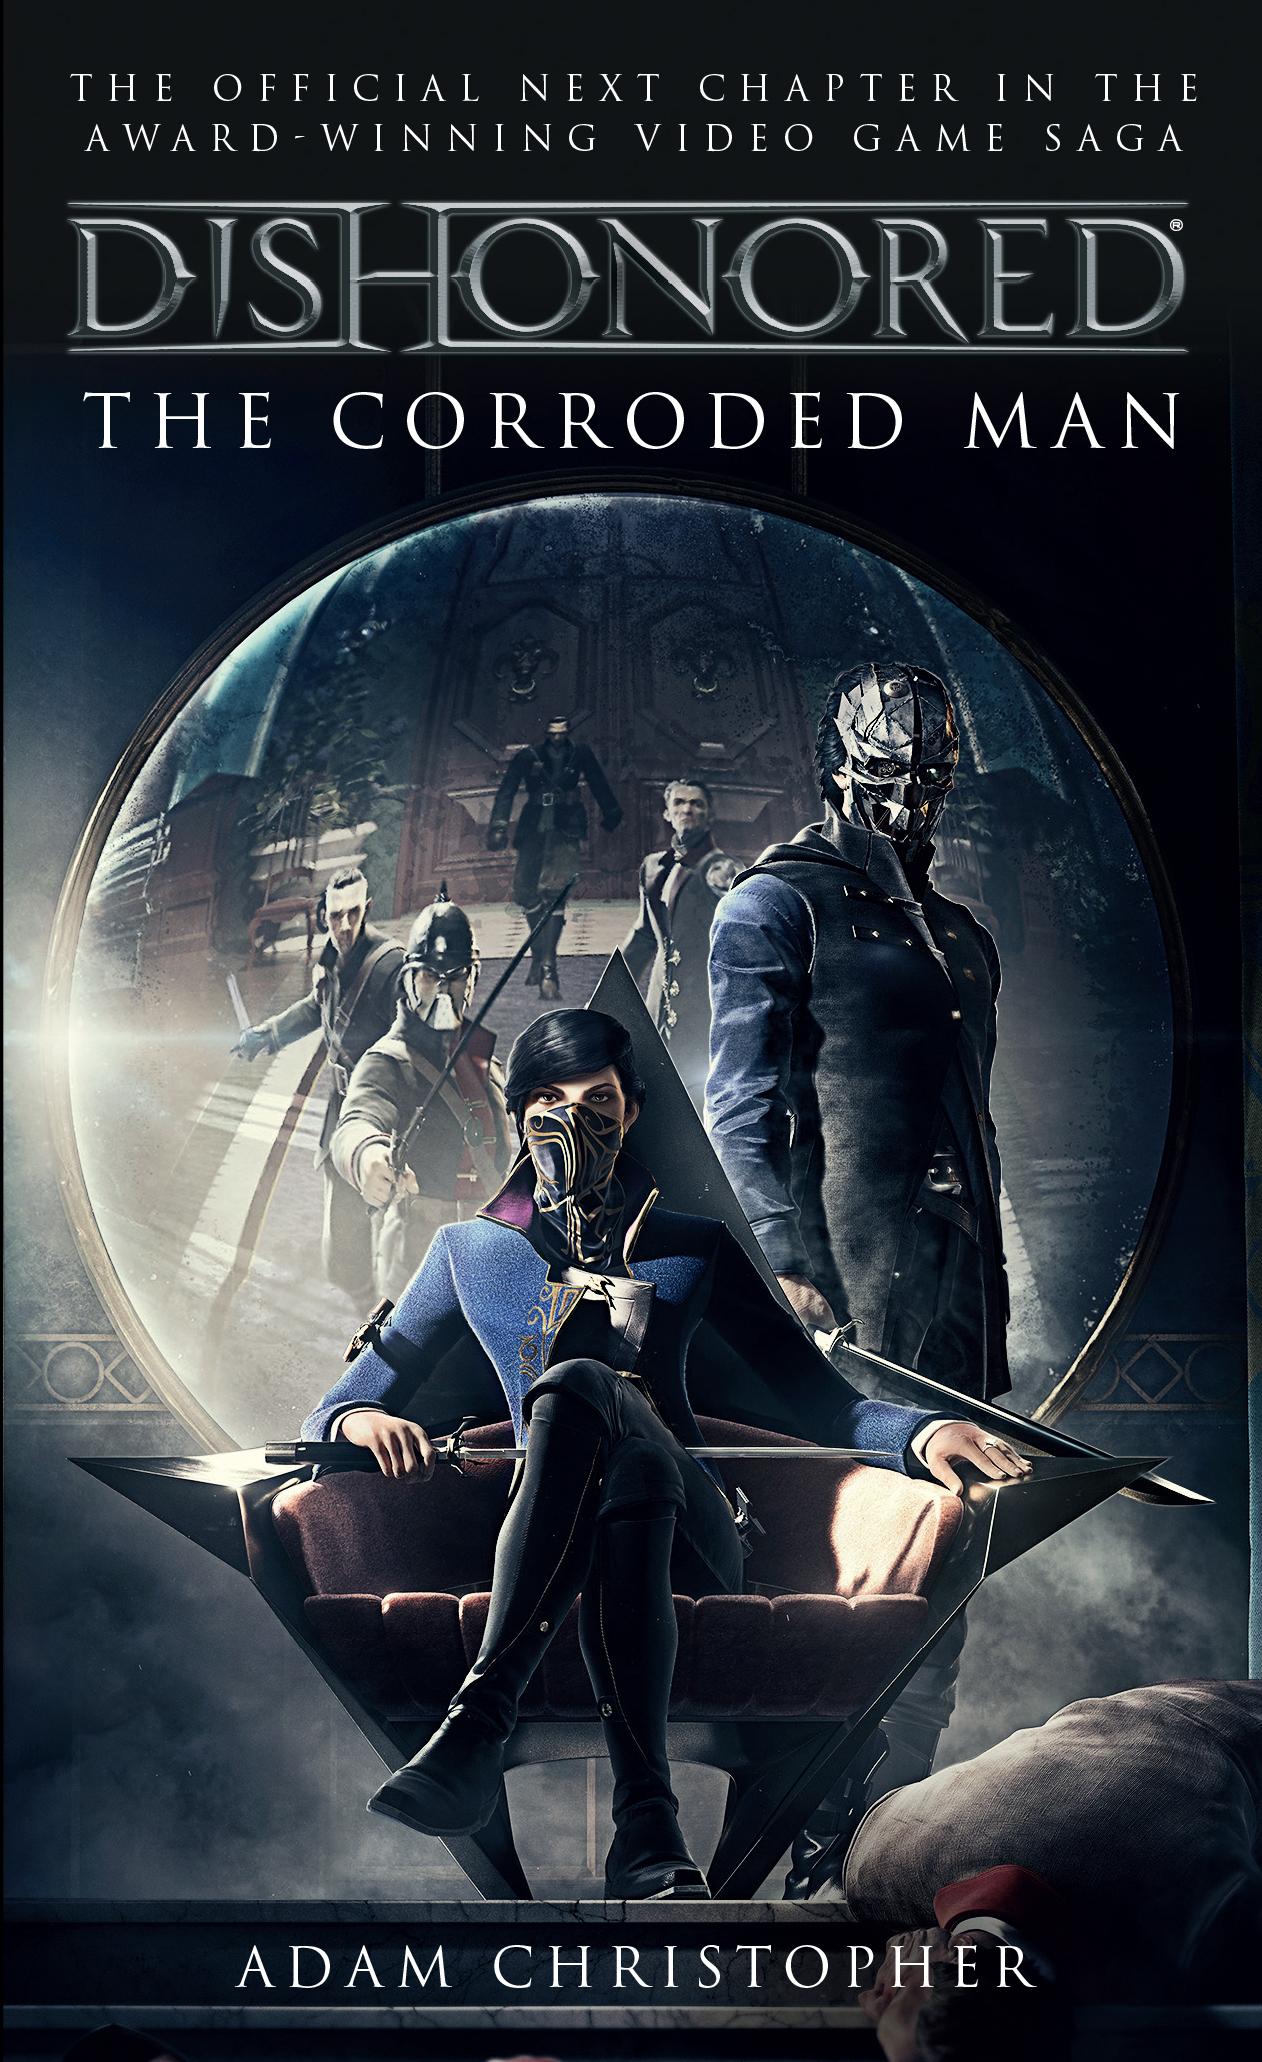 Dishonored Signature Series Guide, Dishonored Wiki